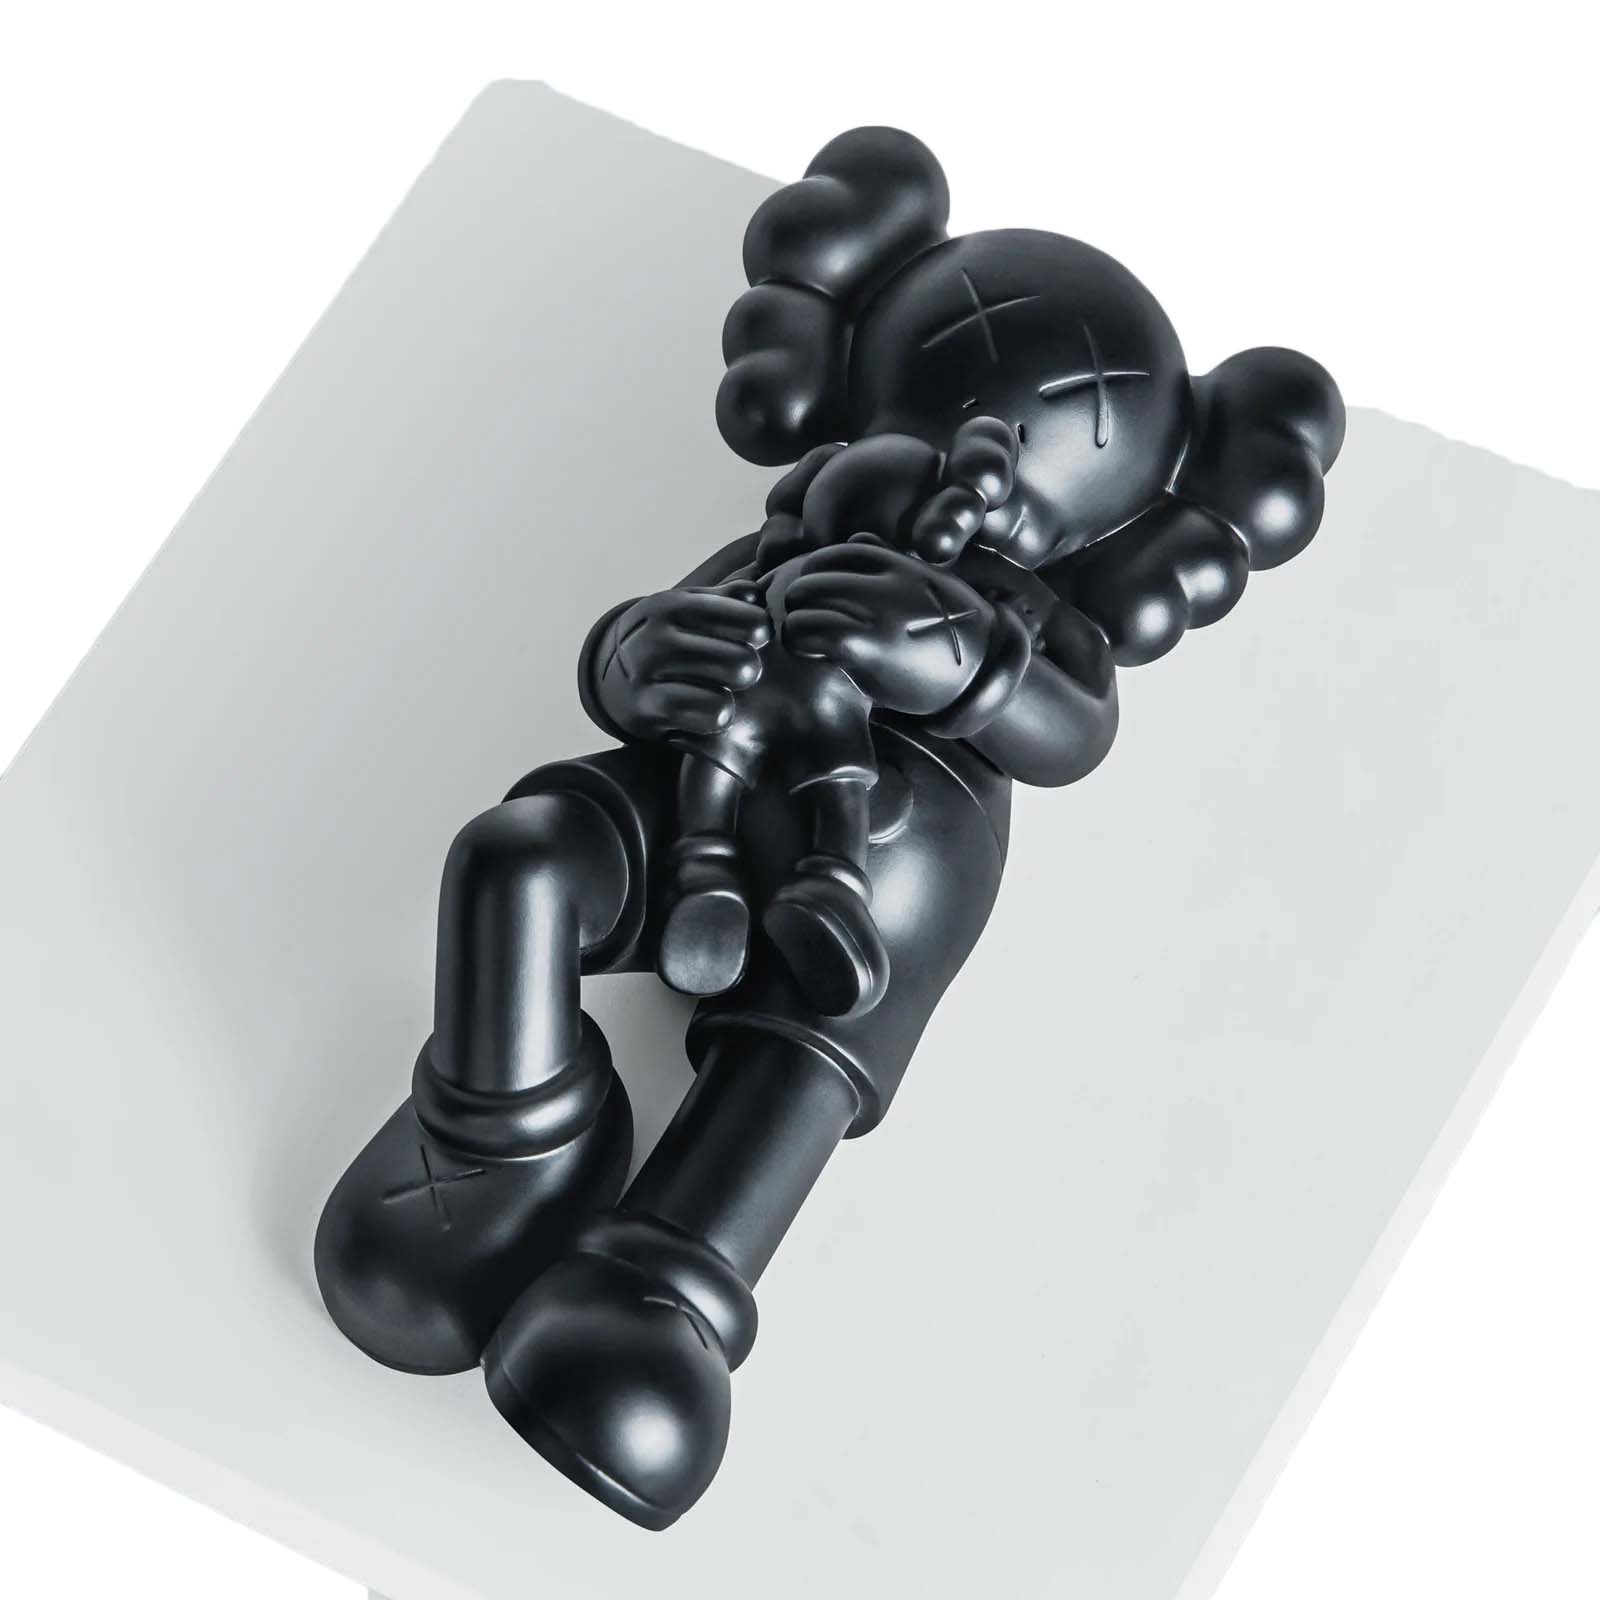 KAWS Good Morning Bronze Figure (Edition of 250 + 50 AP, with Signed COA)